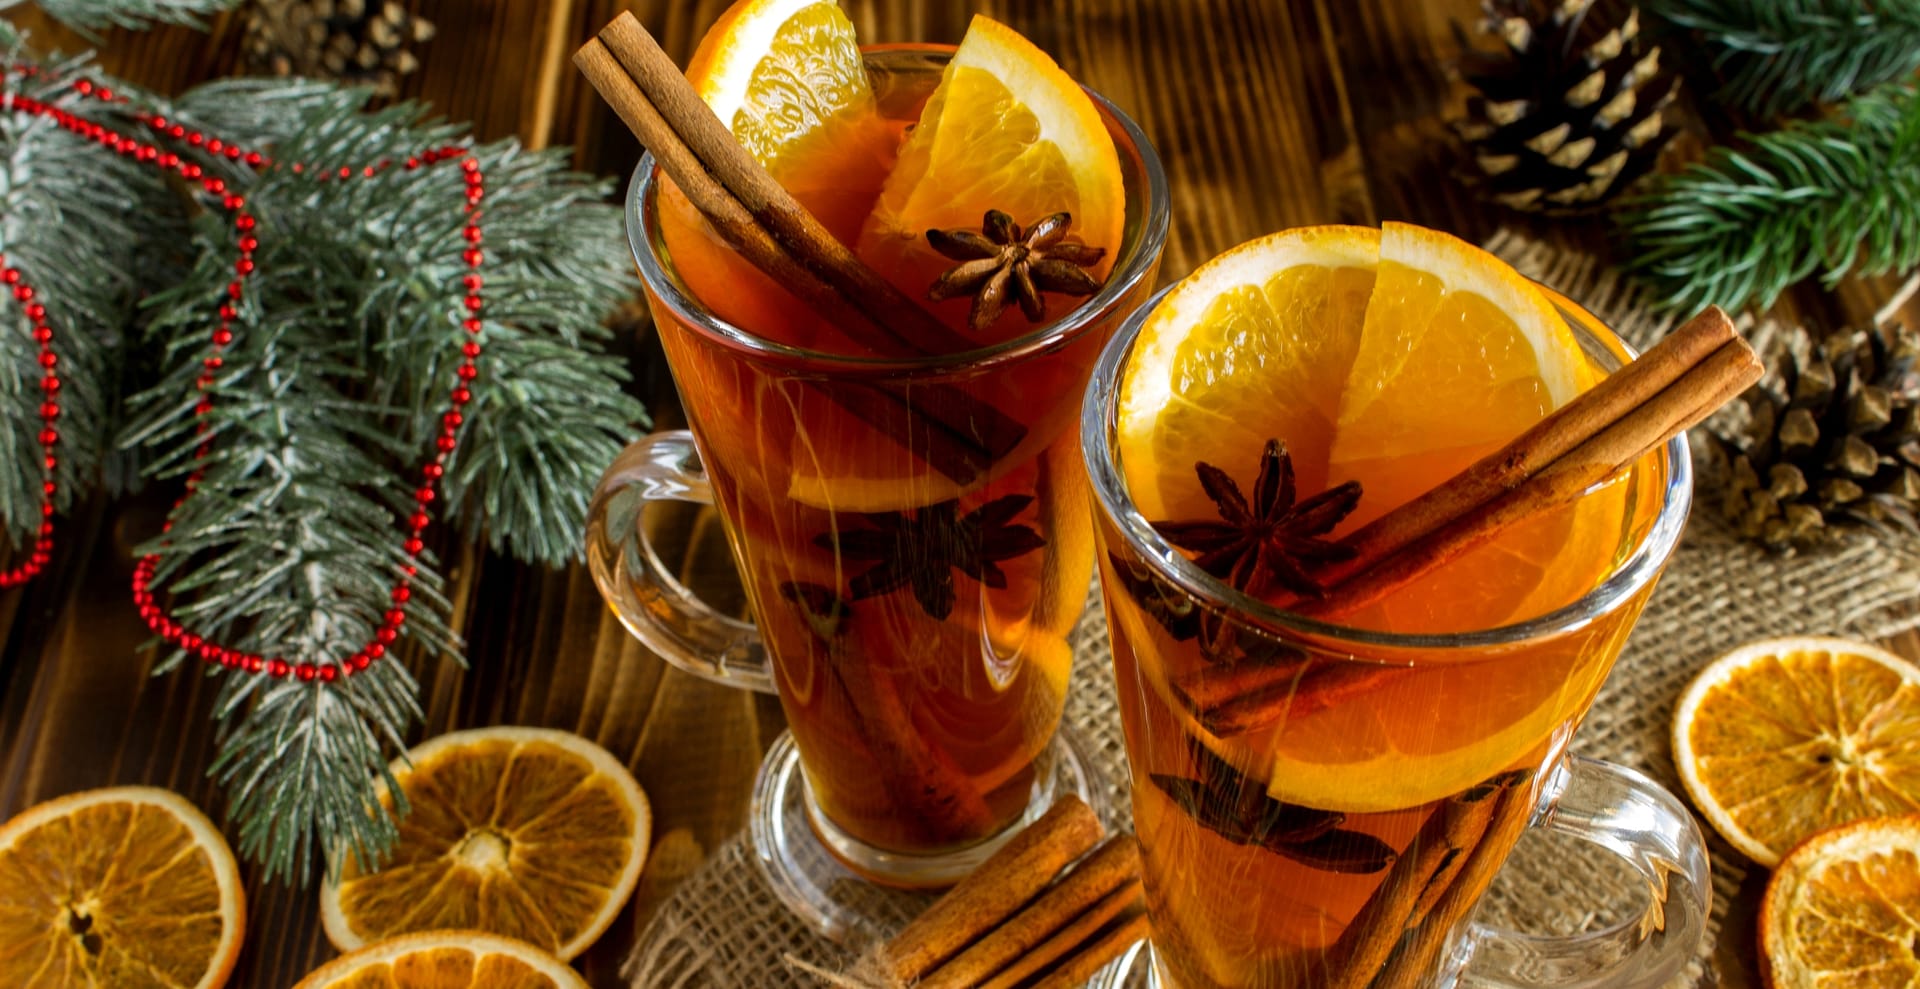 Want to get warm? Try a Grog (rum hot toddy)